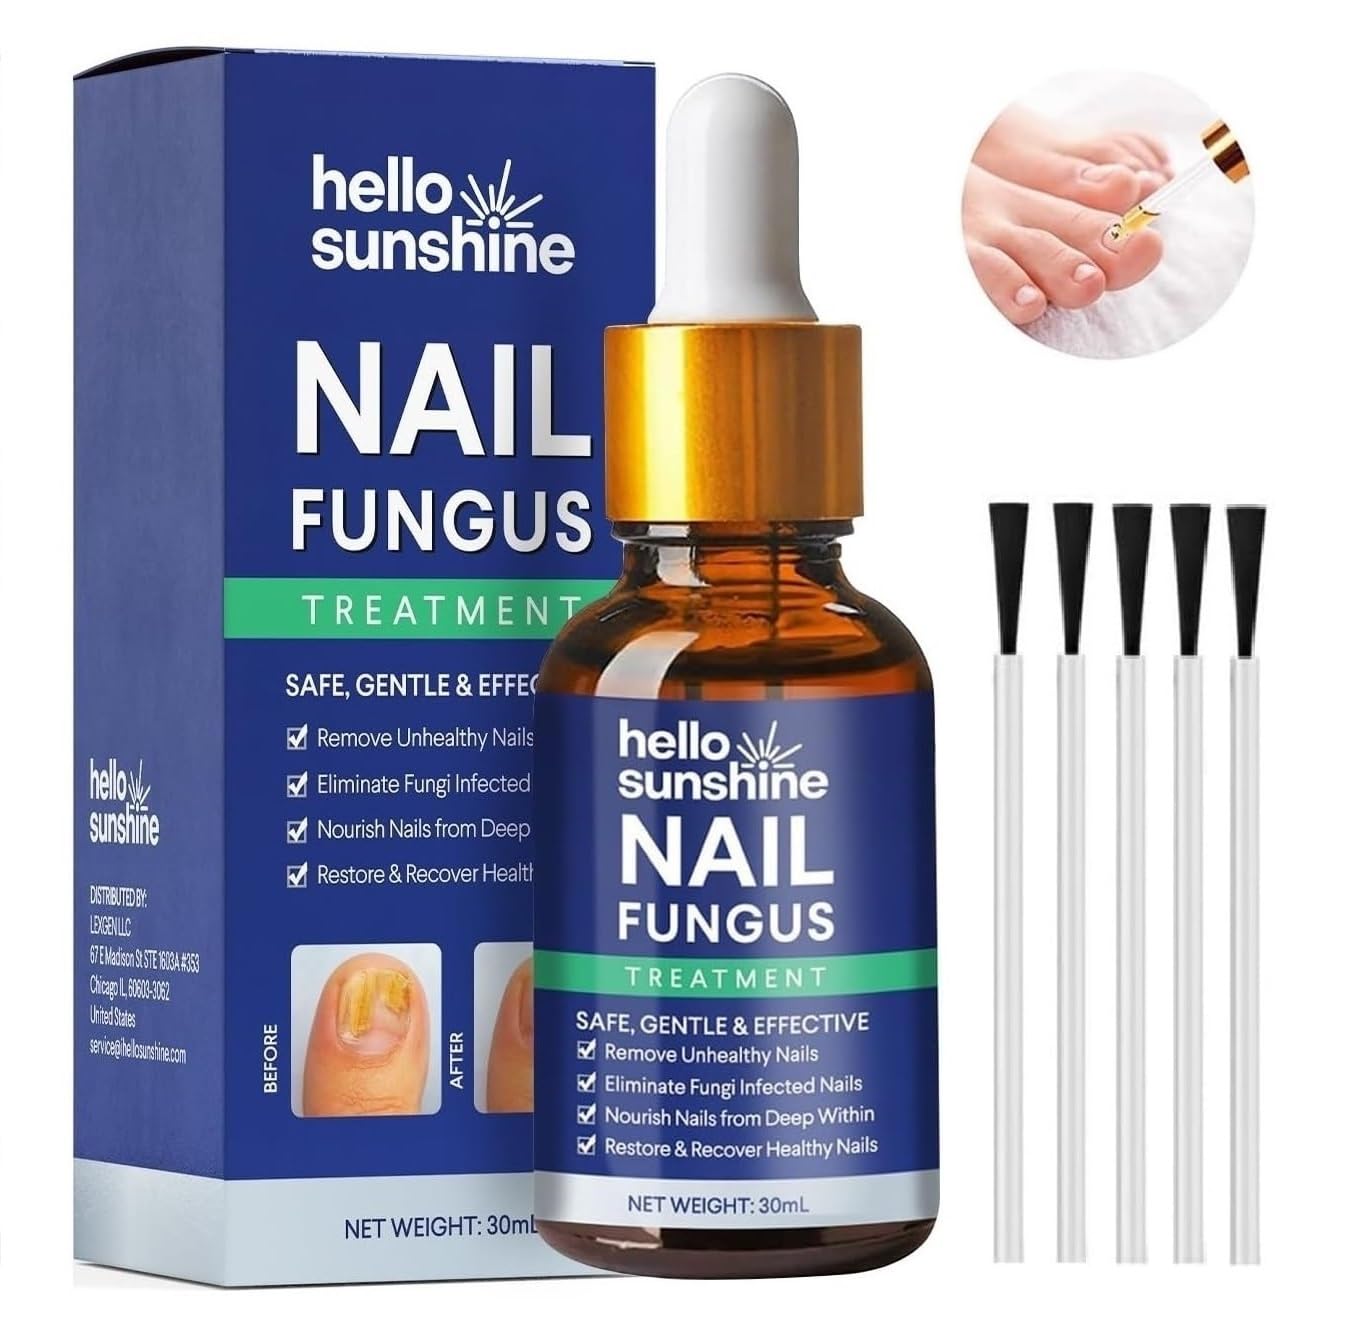 Hello Sunshine Nail Fungus Treatment for Toenail, Toenail Treatment: For & Fingernails, Toe Extra Strength, Athletes Foot, Discolored or Damage